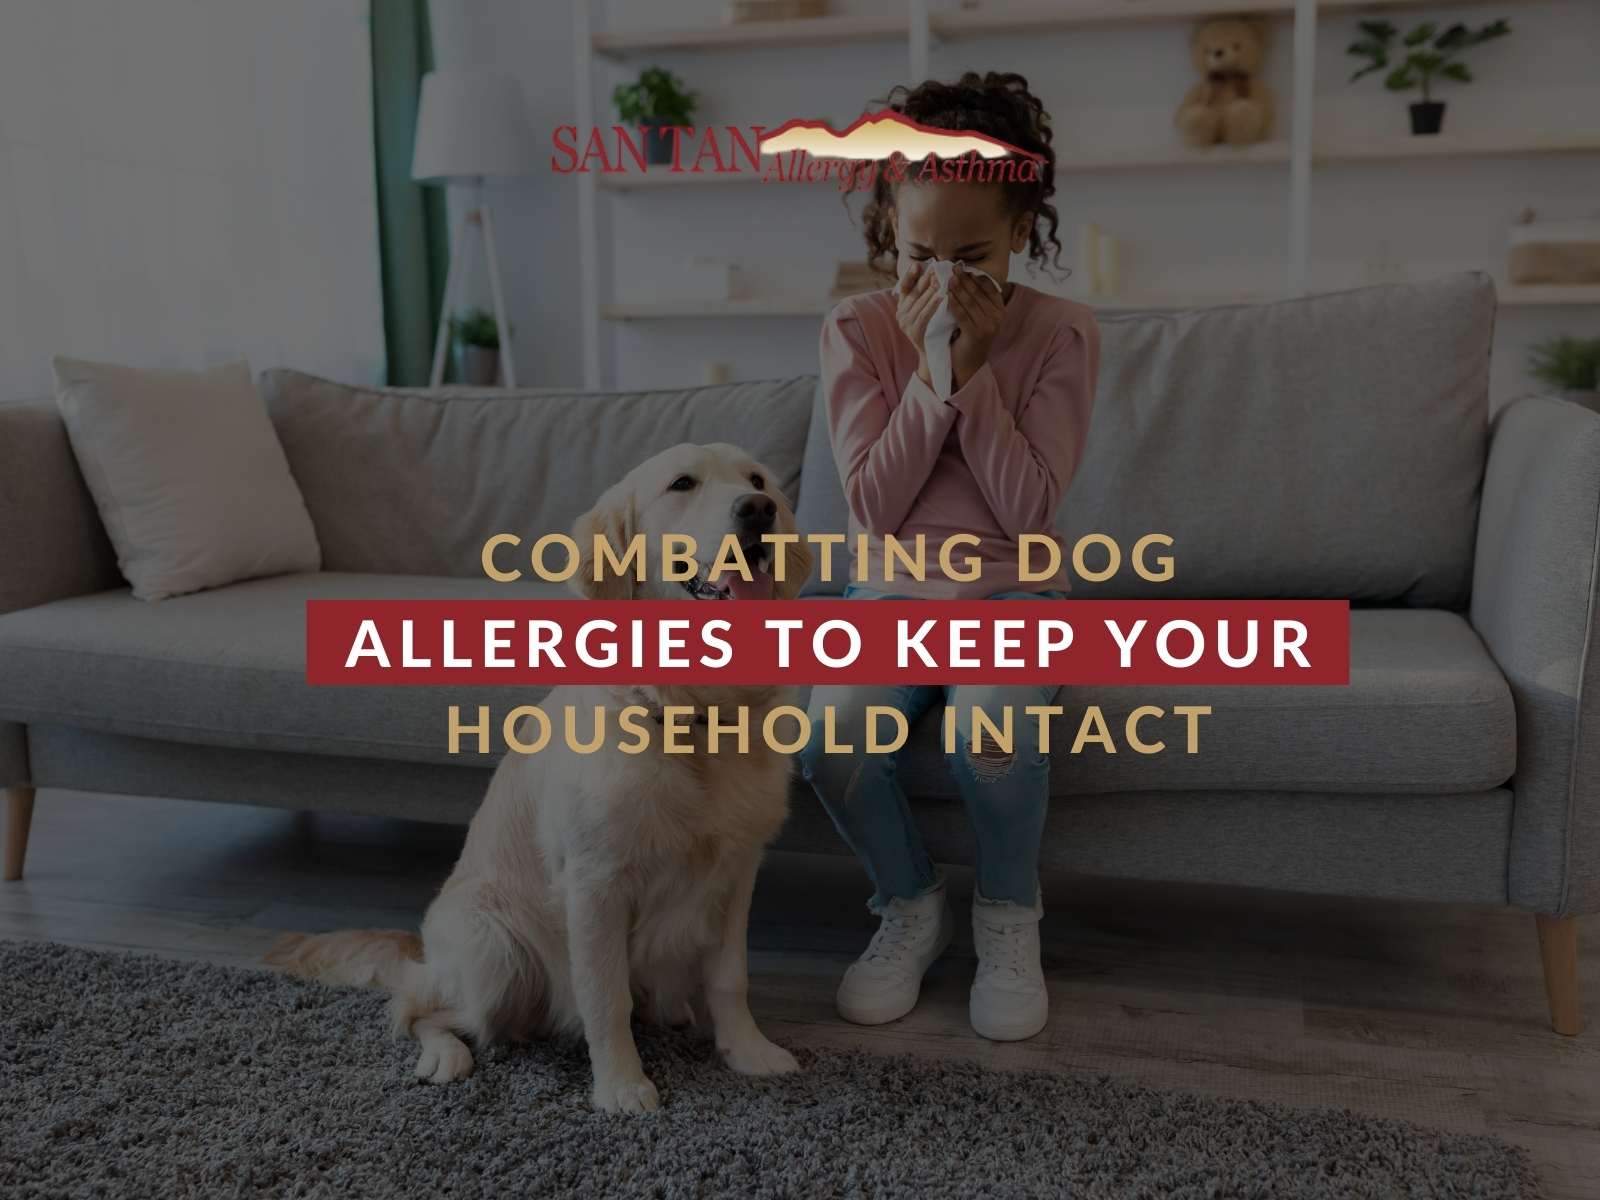 Combatting Dog Allergies To Keep Your Household Intact